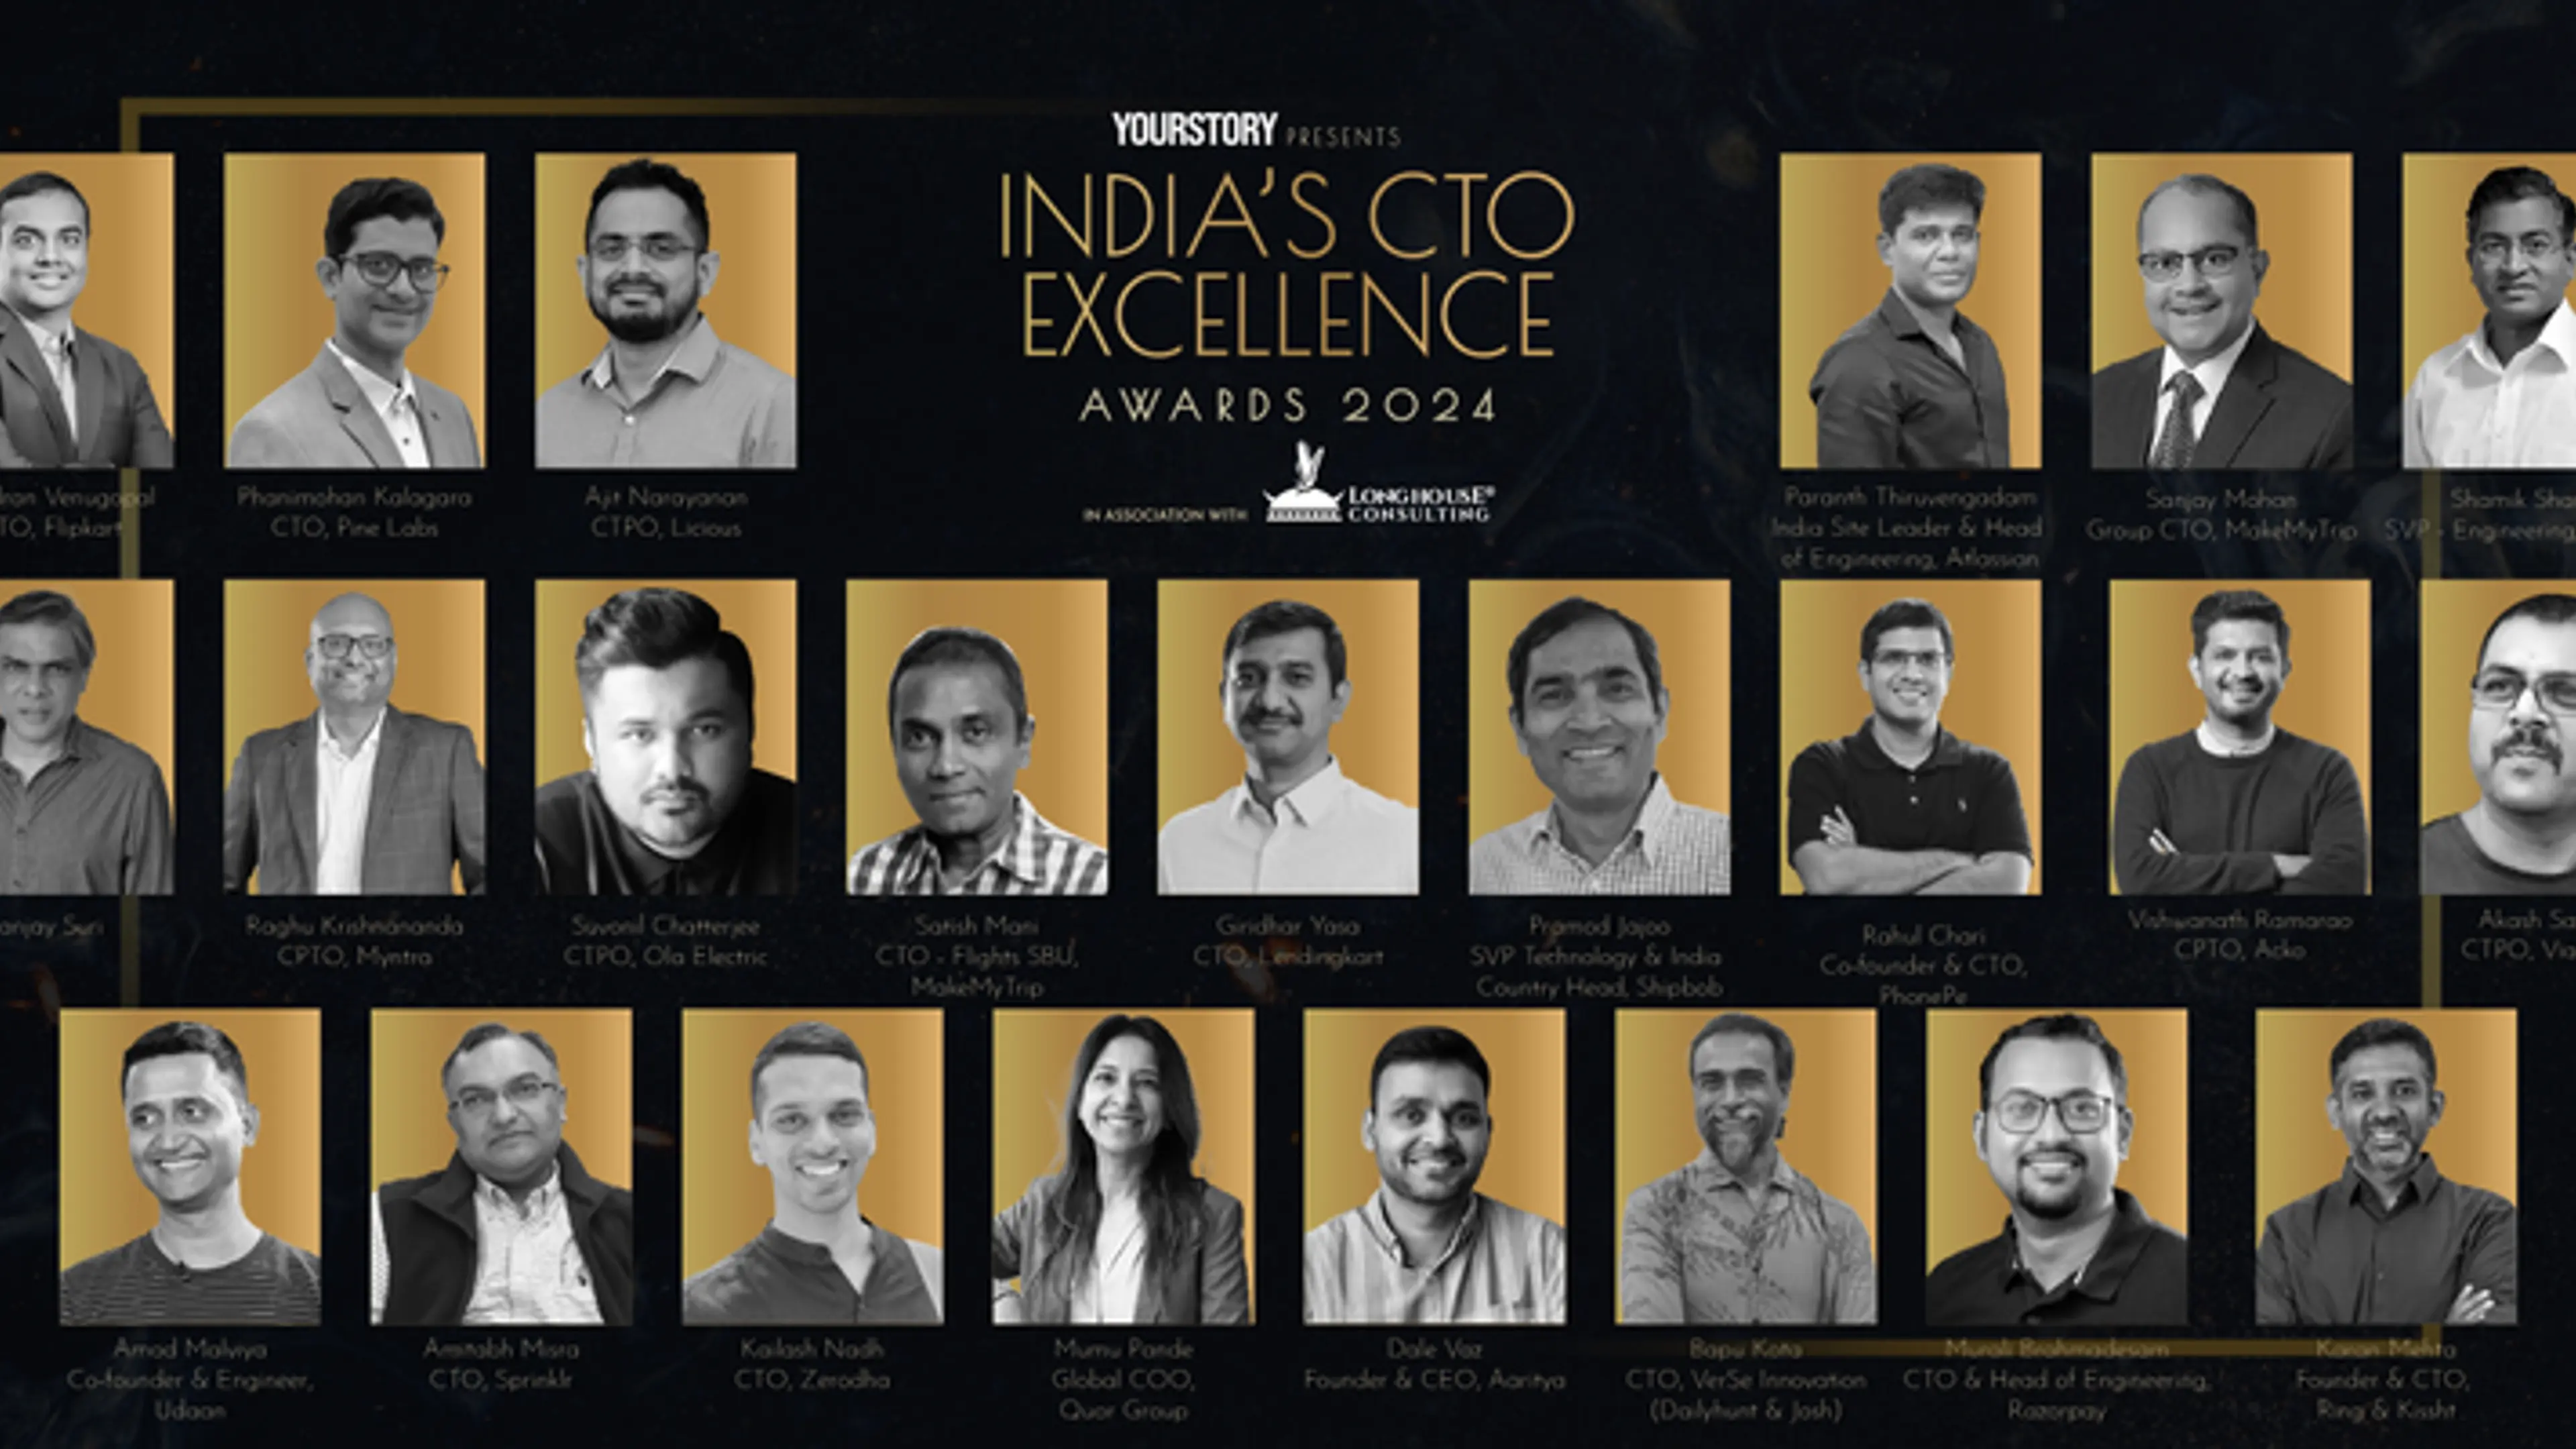 Meet the winners of YourStory India’s CTO Excellence Awards 2024